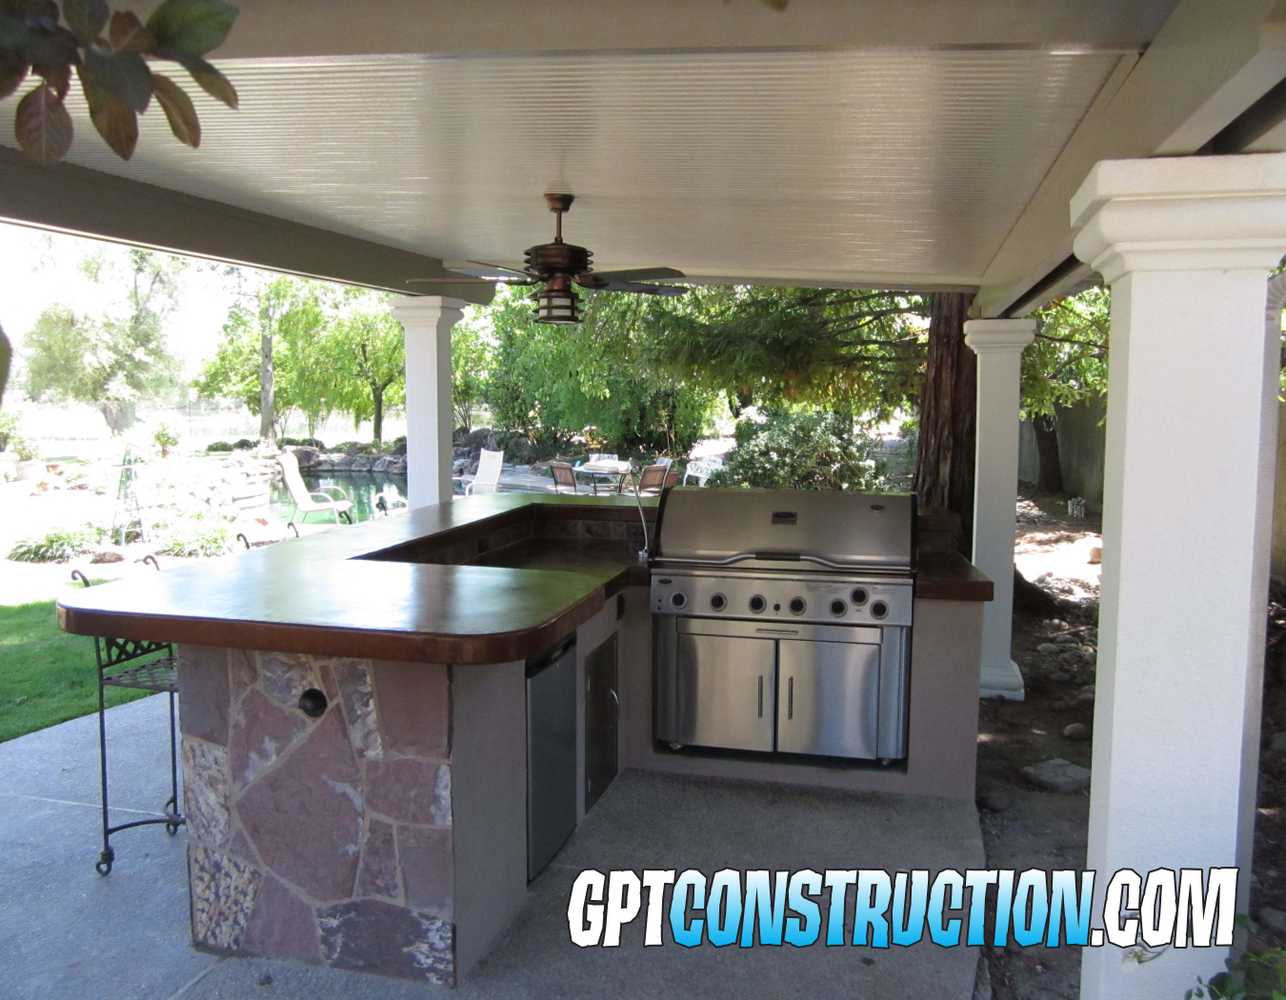 Photo(s) from GPT Construction Masonry and Design Outdoor Kitchen Builder